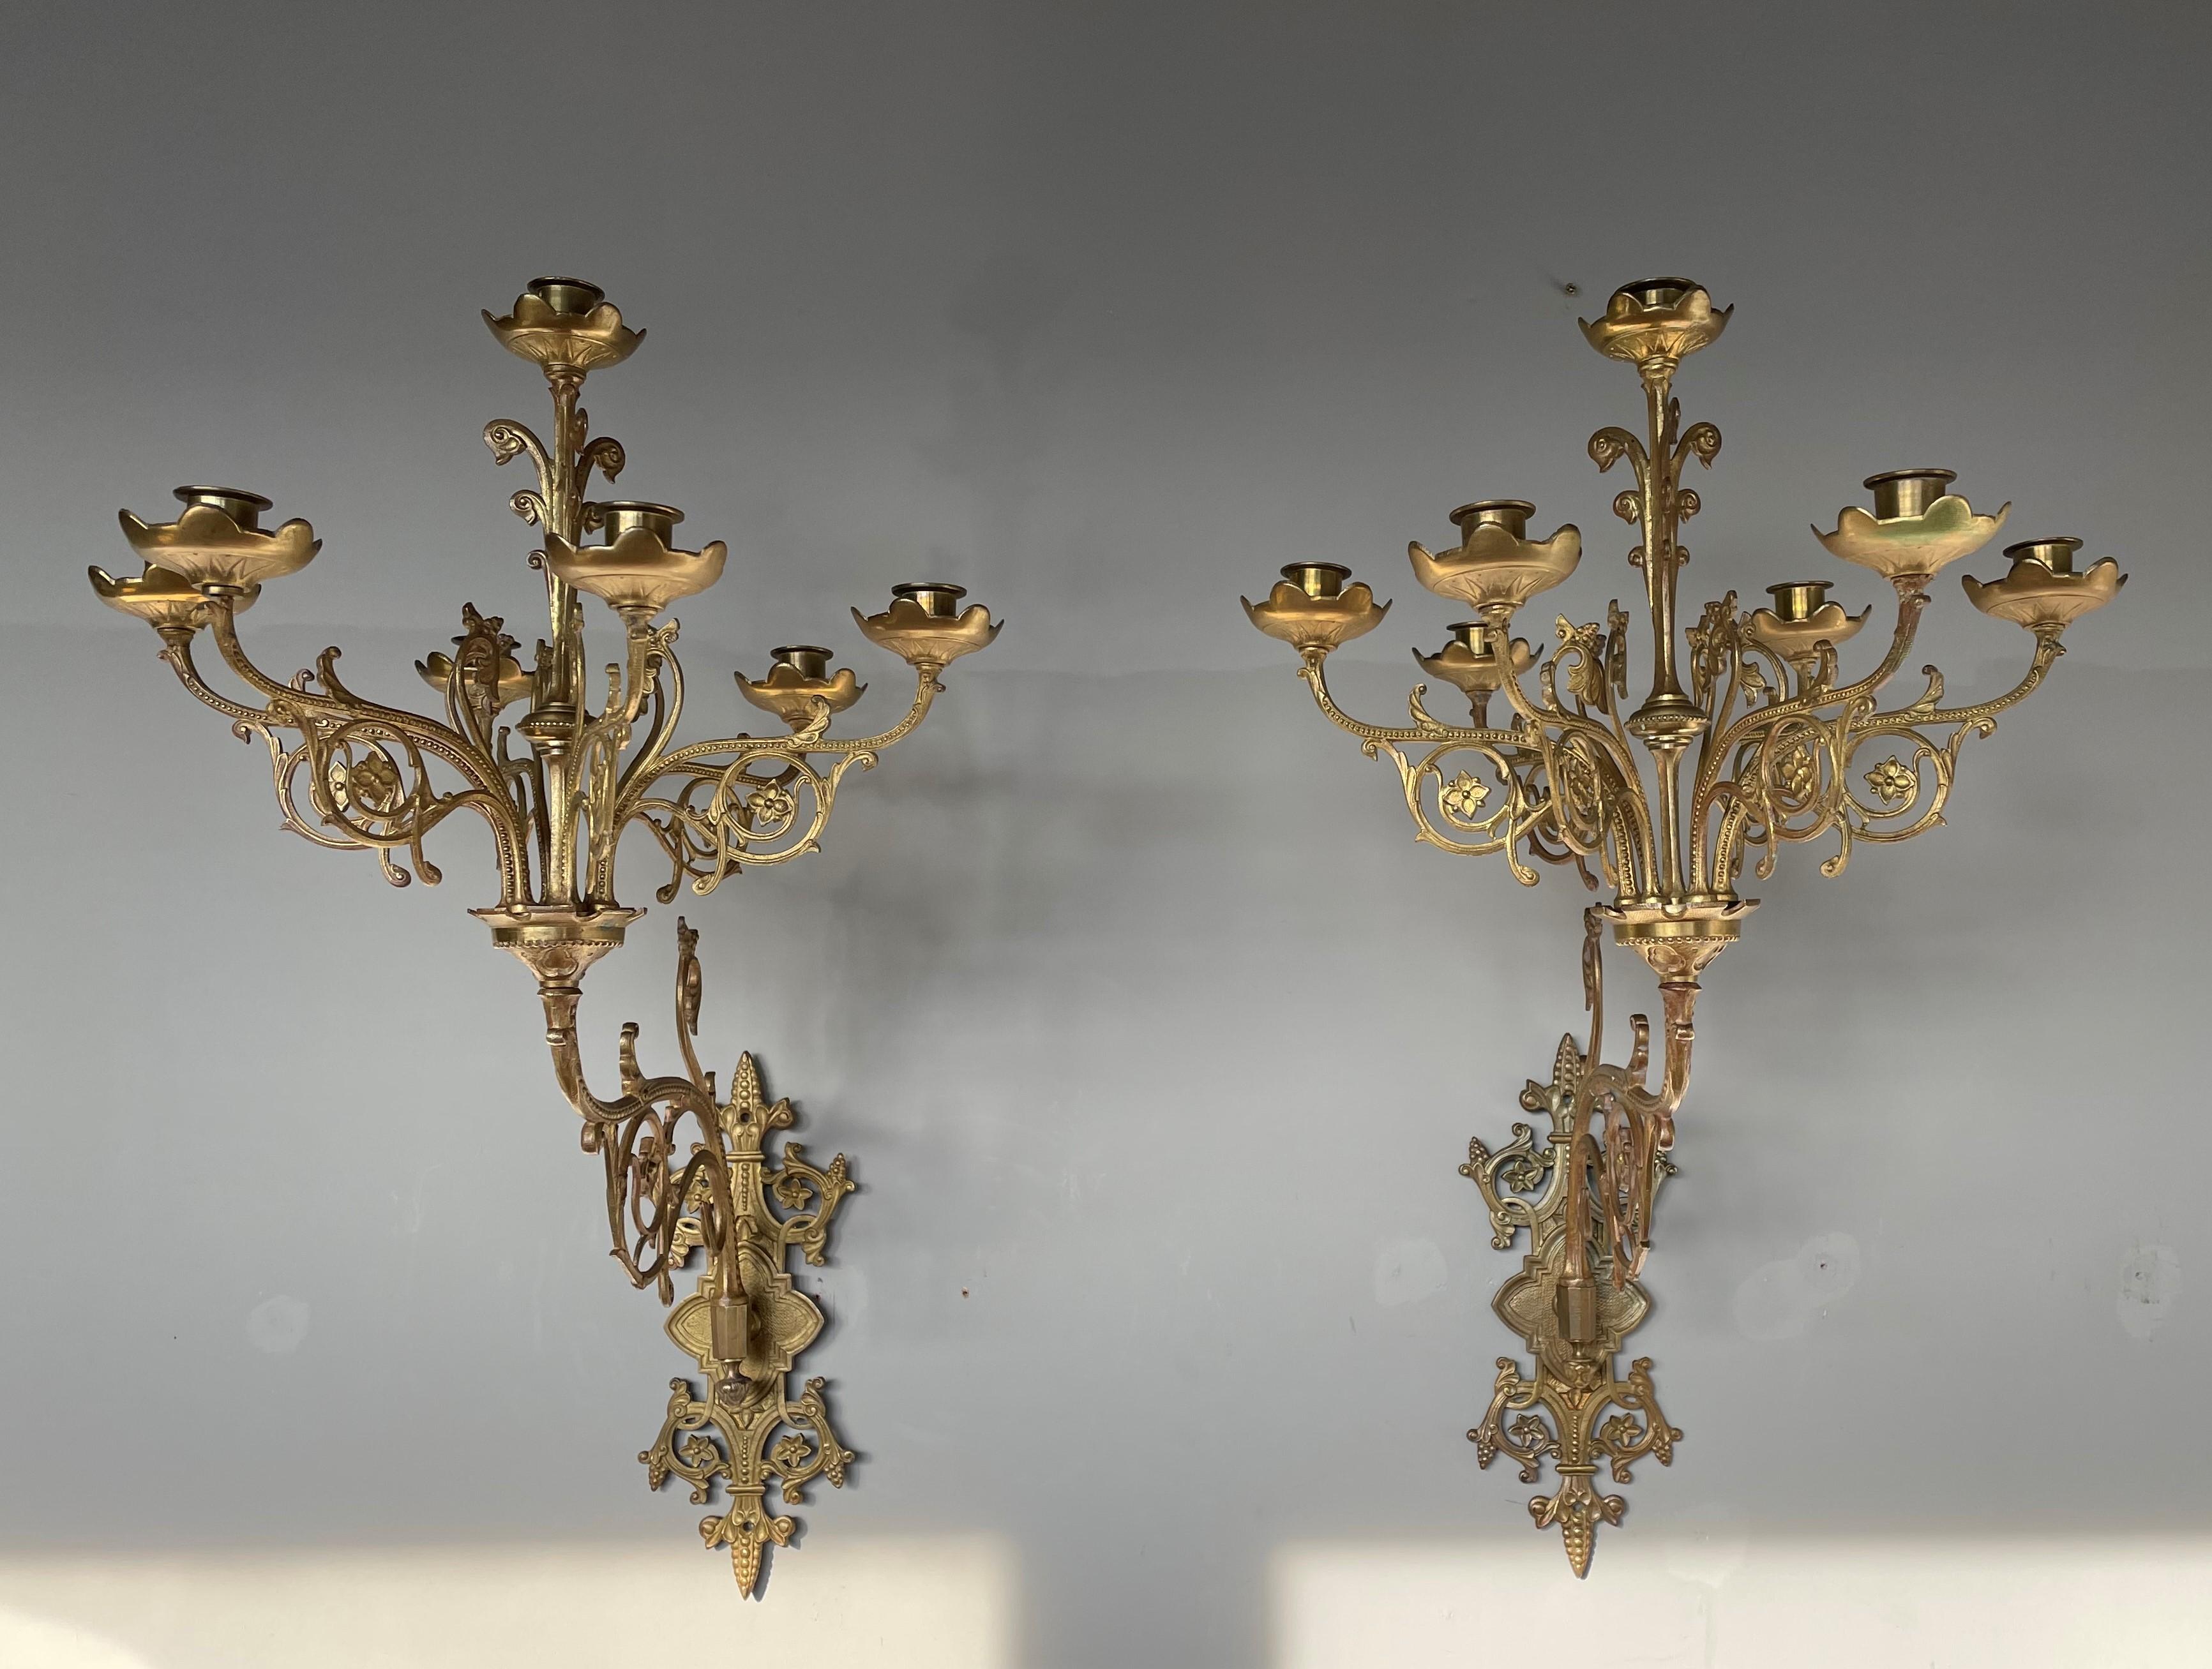 Large Pair of Gothic Revival Gilt Bronze Church Wall Candelabras Candle Sconces For Sale 11